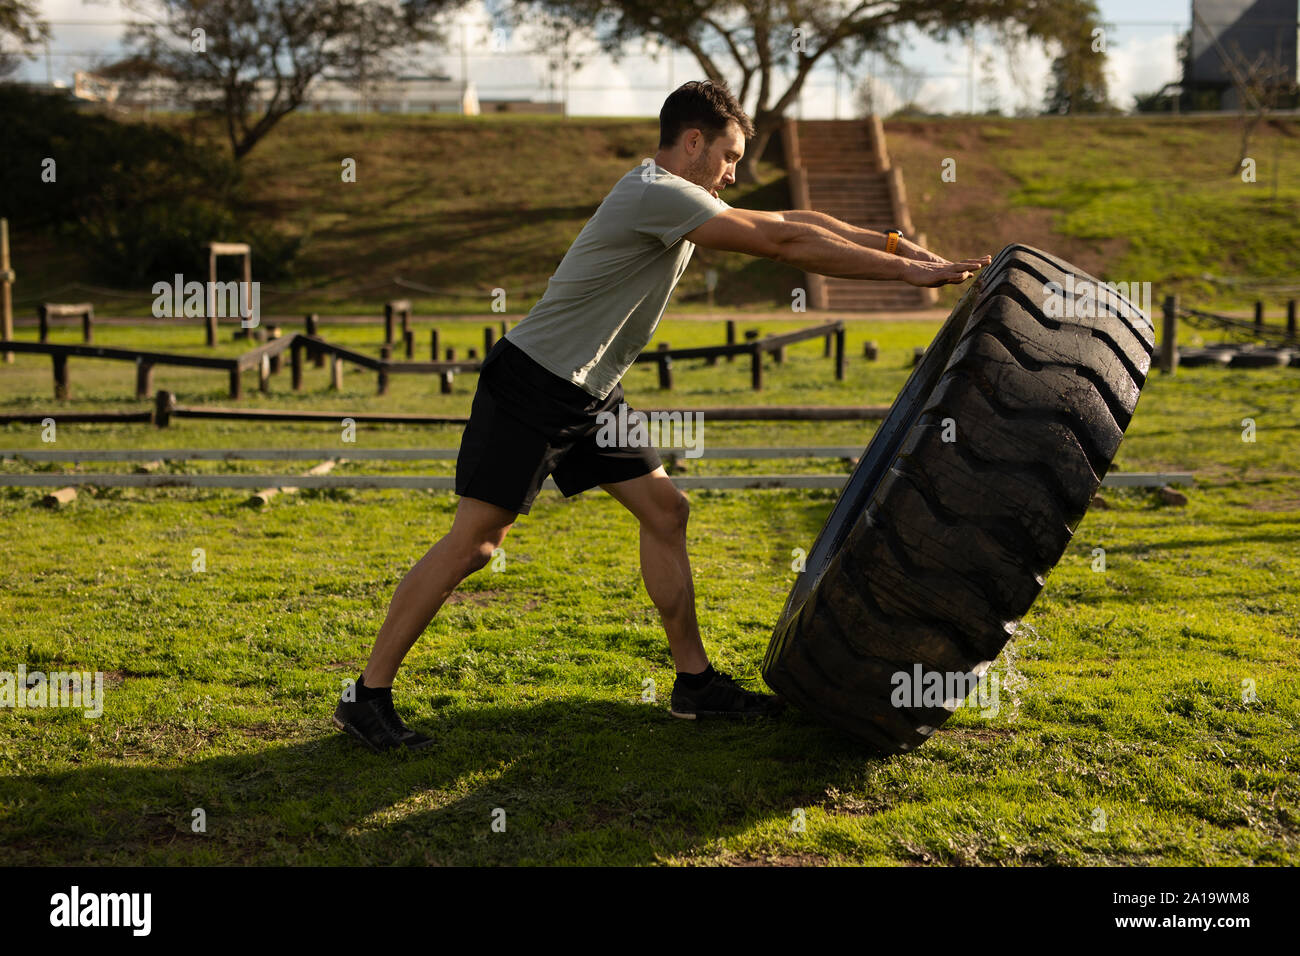 Young man training at an outdoor gym bootcamp Stock Photo - Alamy